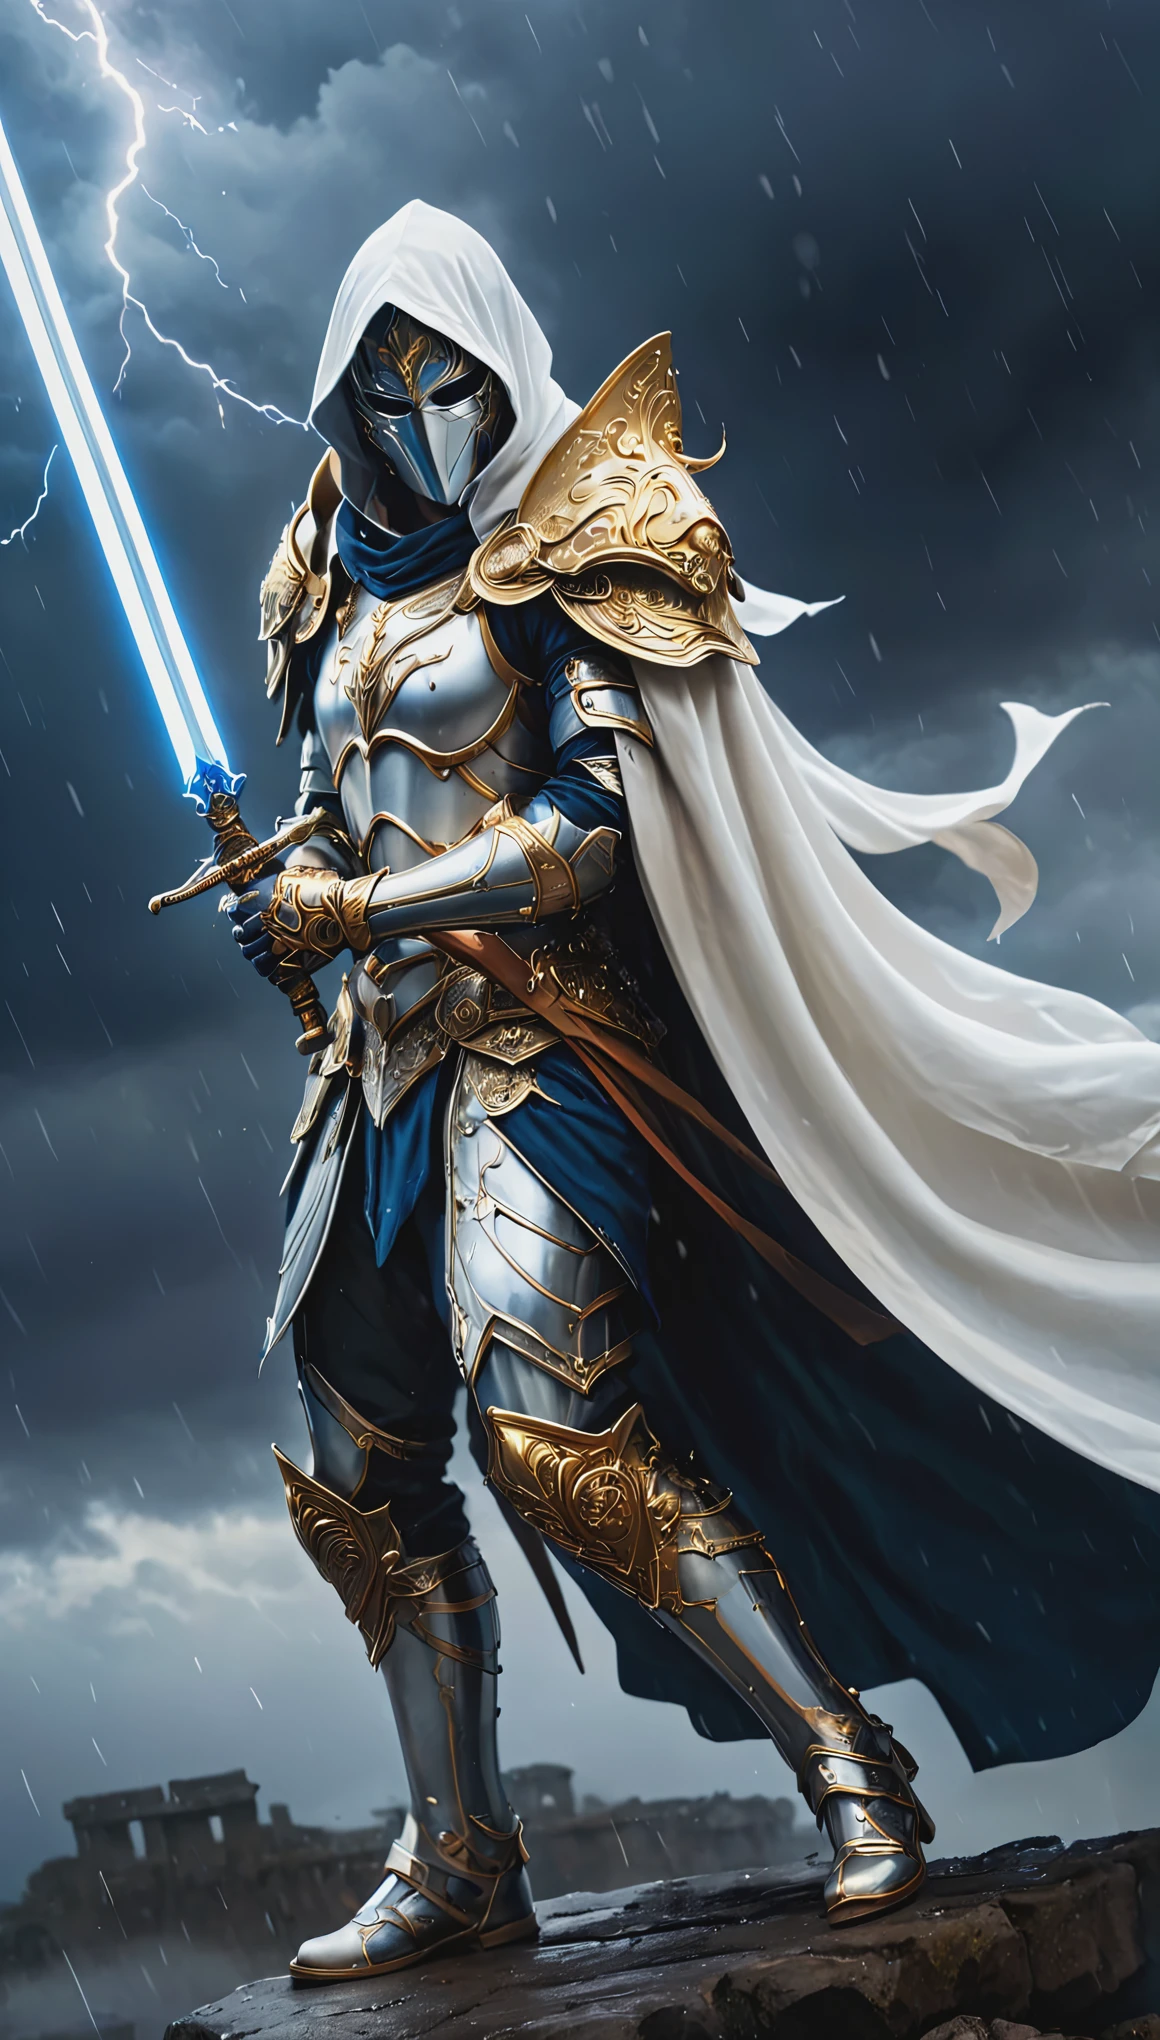 A stunning, highly detailed dark fantasy full body illustration of a proud angelical warrior wearing intricate medieval white HKStyle armor and an epic white ornamented mask, holding a great golden glowing sword, golden and blue glooming eyes, very wide shoulders, wearing big gauntlets, epic composition. The warrior stands heroic with a flowing cloak and white hood during a storm with foggy gloom, thunderclouds in the background . The scene depicts him with brooding emotional agony , style by Greg Rutkowski, by Milo Manara and Russ Mills, with insanely intricate details and textures, gloomy dramatic lighting, 8K resolution